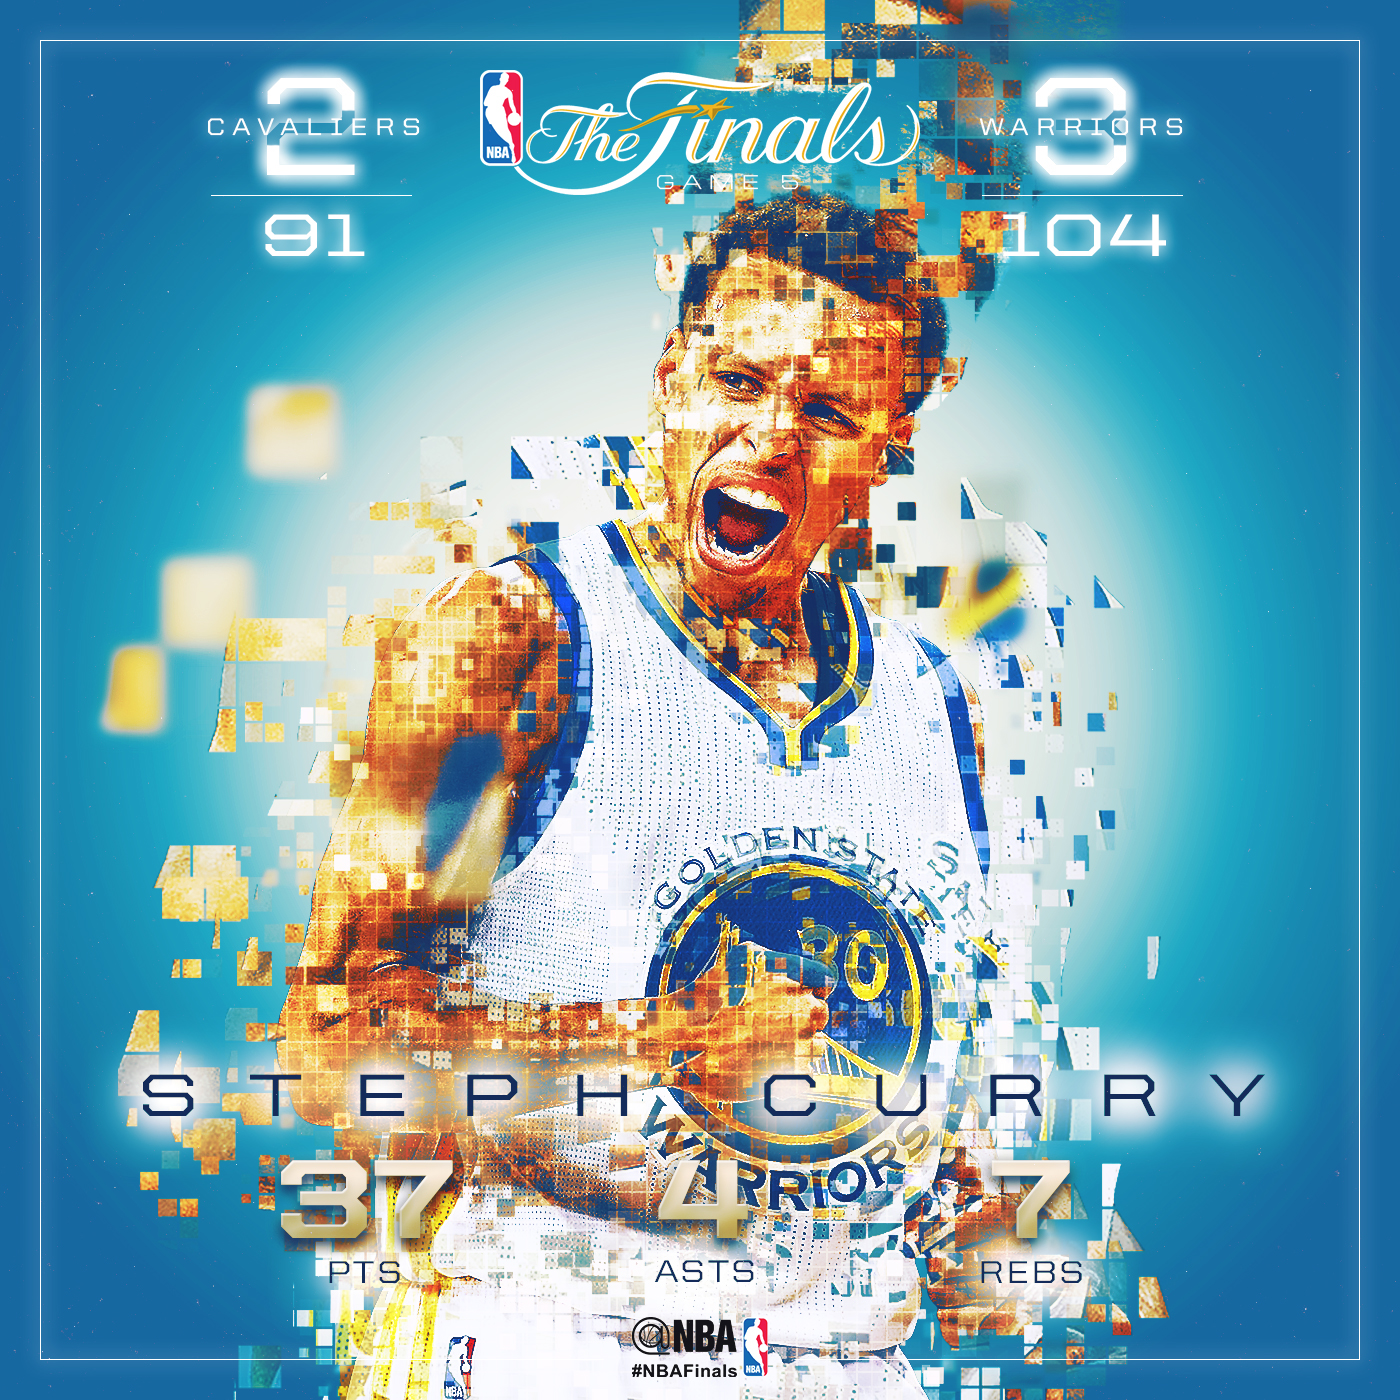 NBA Finals real time live artwork designs Golden State Warriors Cleveland Cavaliers sport basketball LeBron steph curry